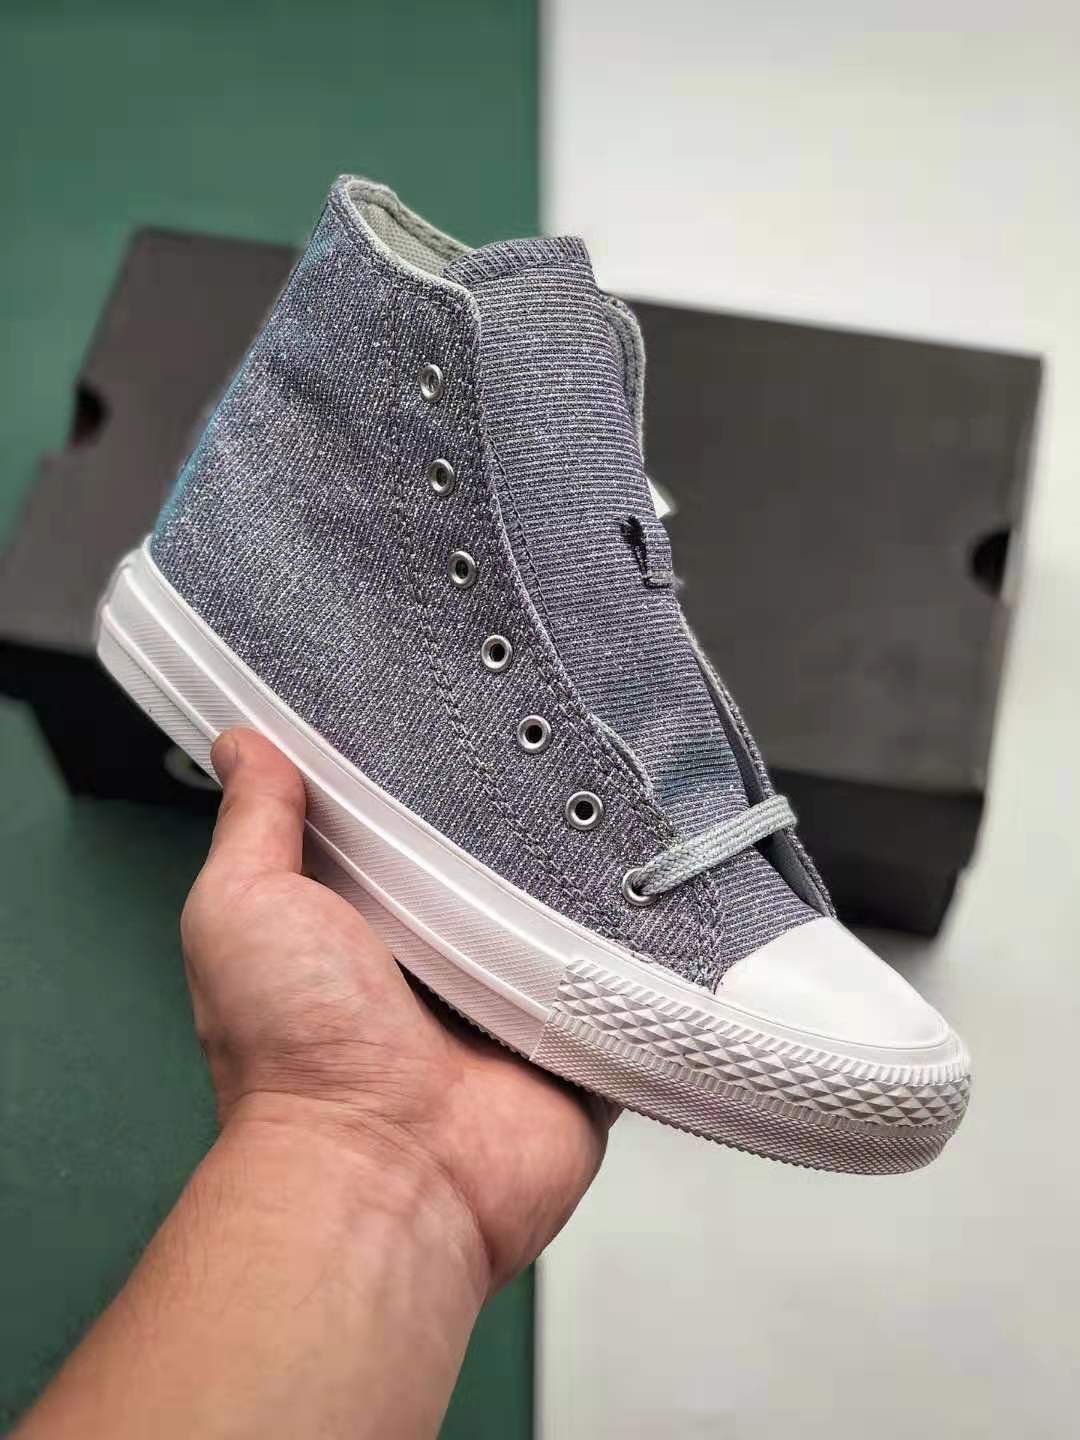 Converse Chuck Taylor All Starware High 'Gradient Glitter' 564910C - Sparkling Style for Ultimate Comfort